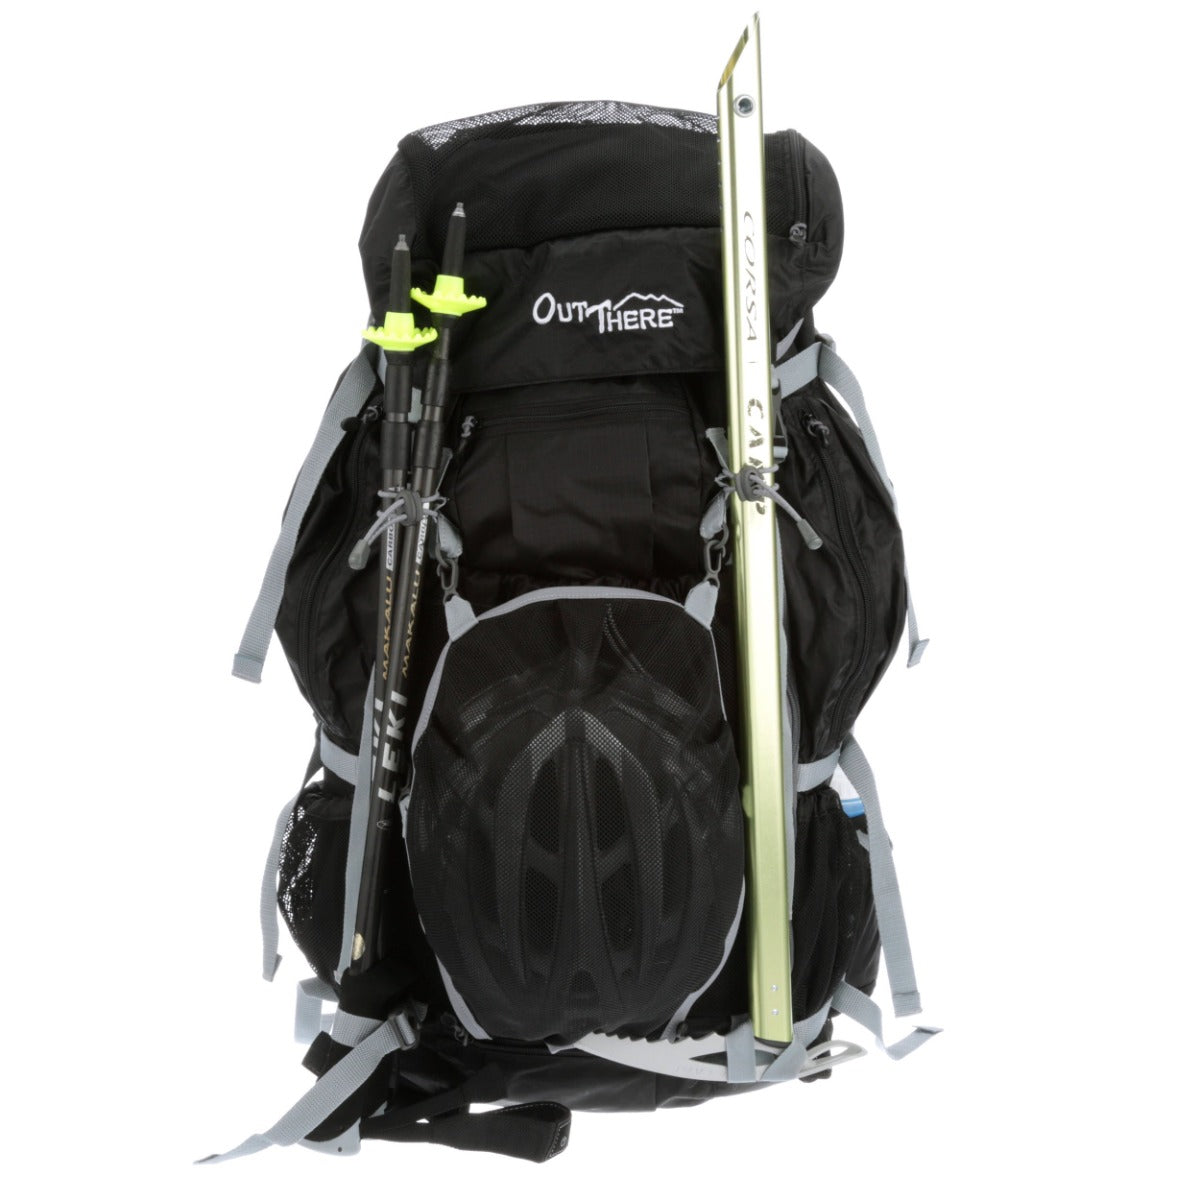 OutThere 45 liter backpacking pack